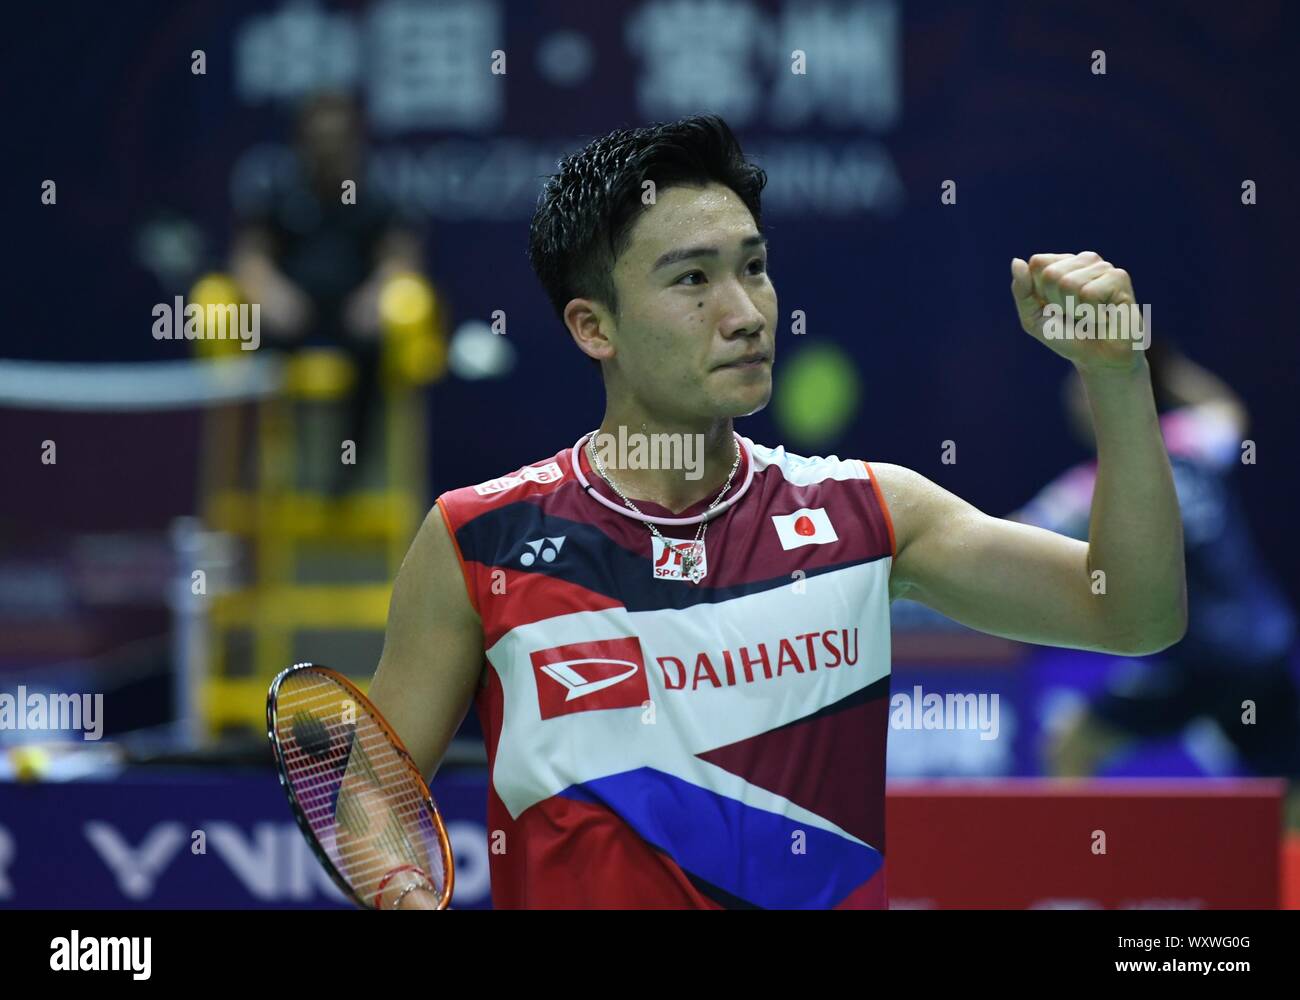 Japanese professional badminton player Kento Momota competes against Chinese professional badminton player Lin Dan at the first round of men's single of VICTOR China Open 2019, in Changzhou city, east China's Jiangsu province, 17 September 2019. Chinese professional badminton player Lin Dan was defeated by Japanese professional badminton player Kento Momota with 0-2 at the first round of men's single of VICTOR China Open 2019, in Changzhou city, east China's Jiangsu province, 17 September 2019. Stock Photo